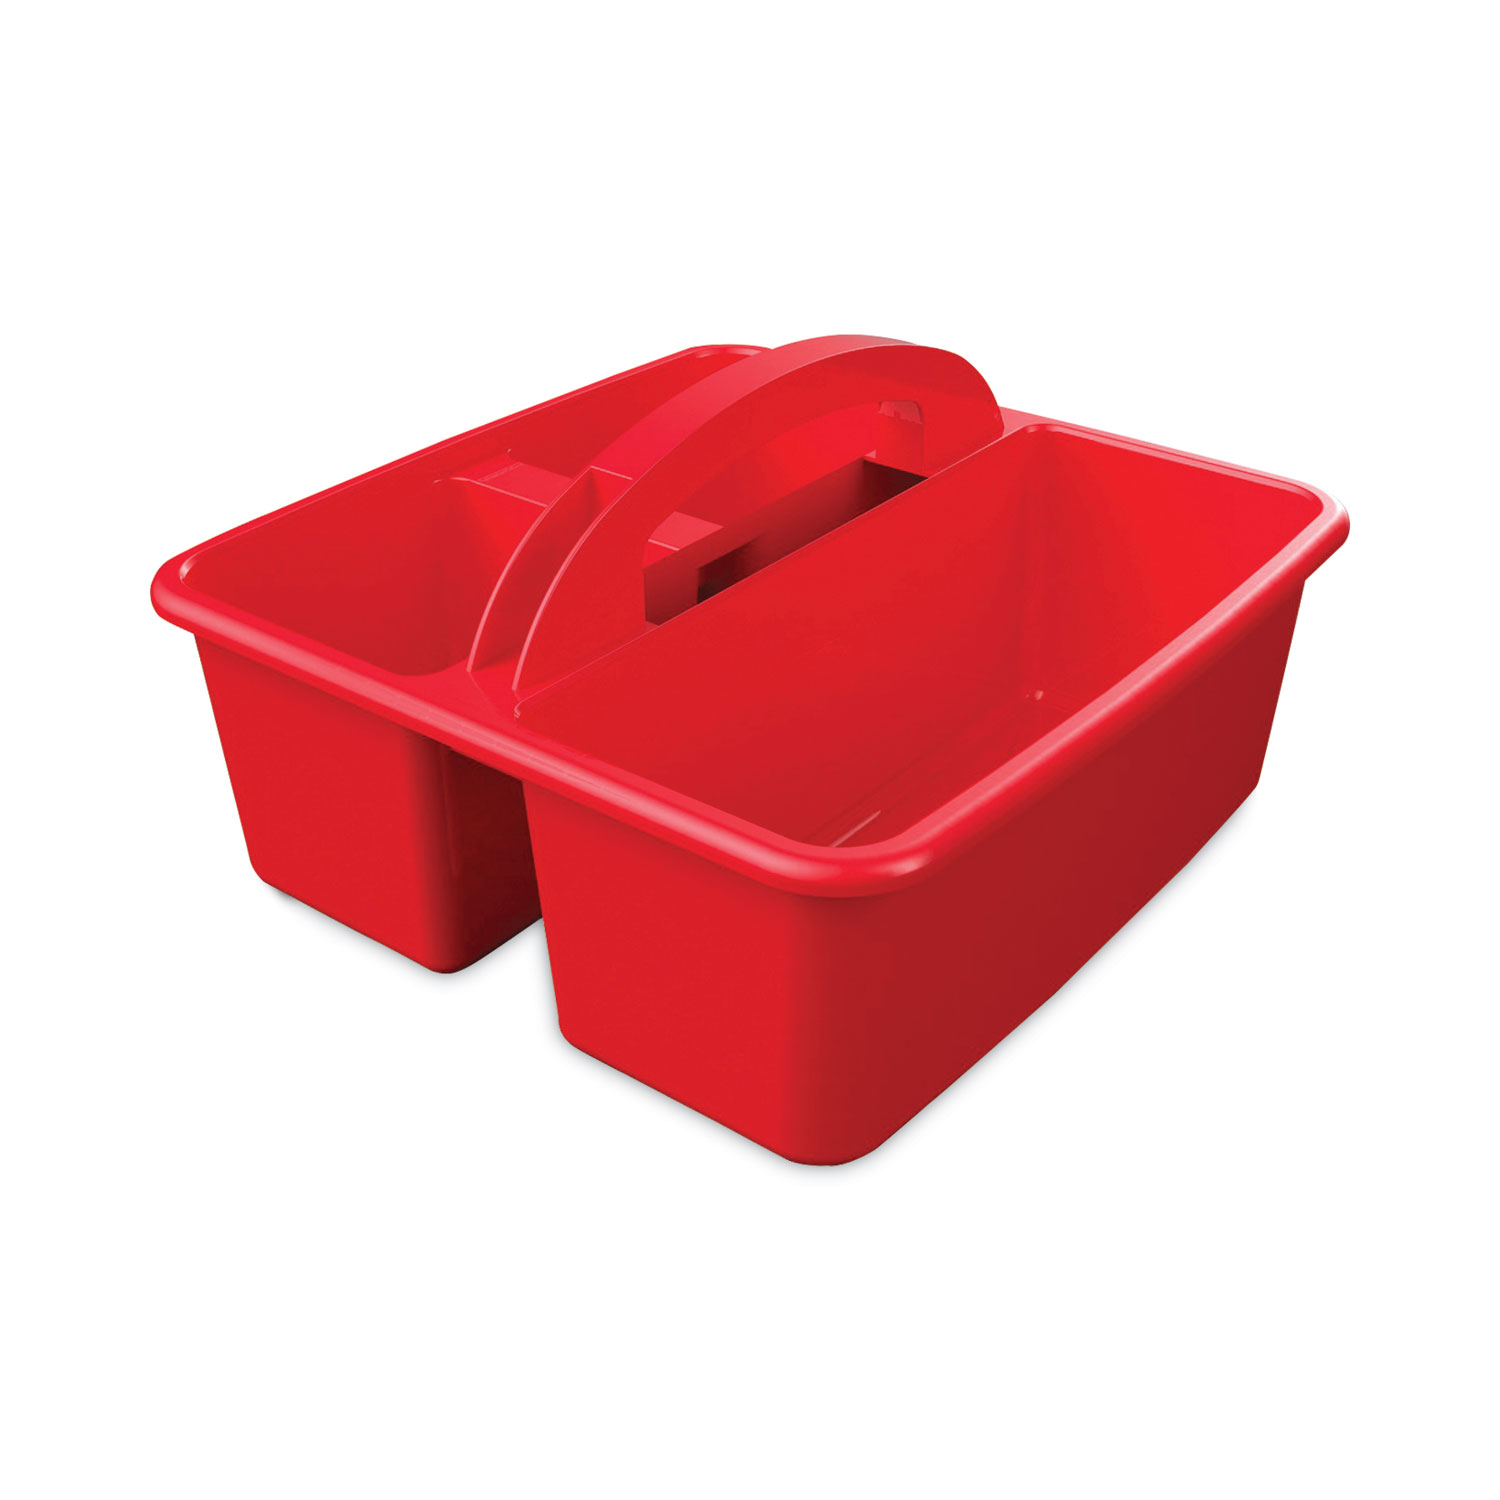 Deflecto Antimicrobial No Spill Paint Cup 3.46 W x 3.93 H Red